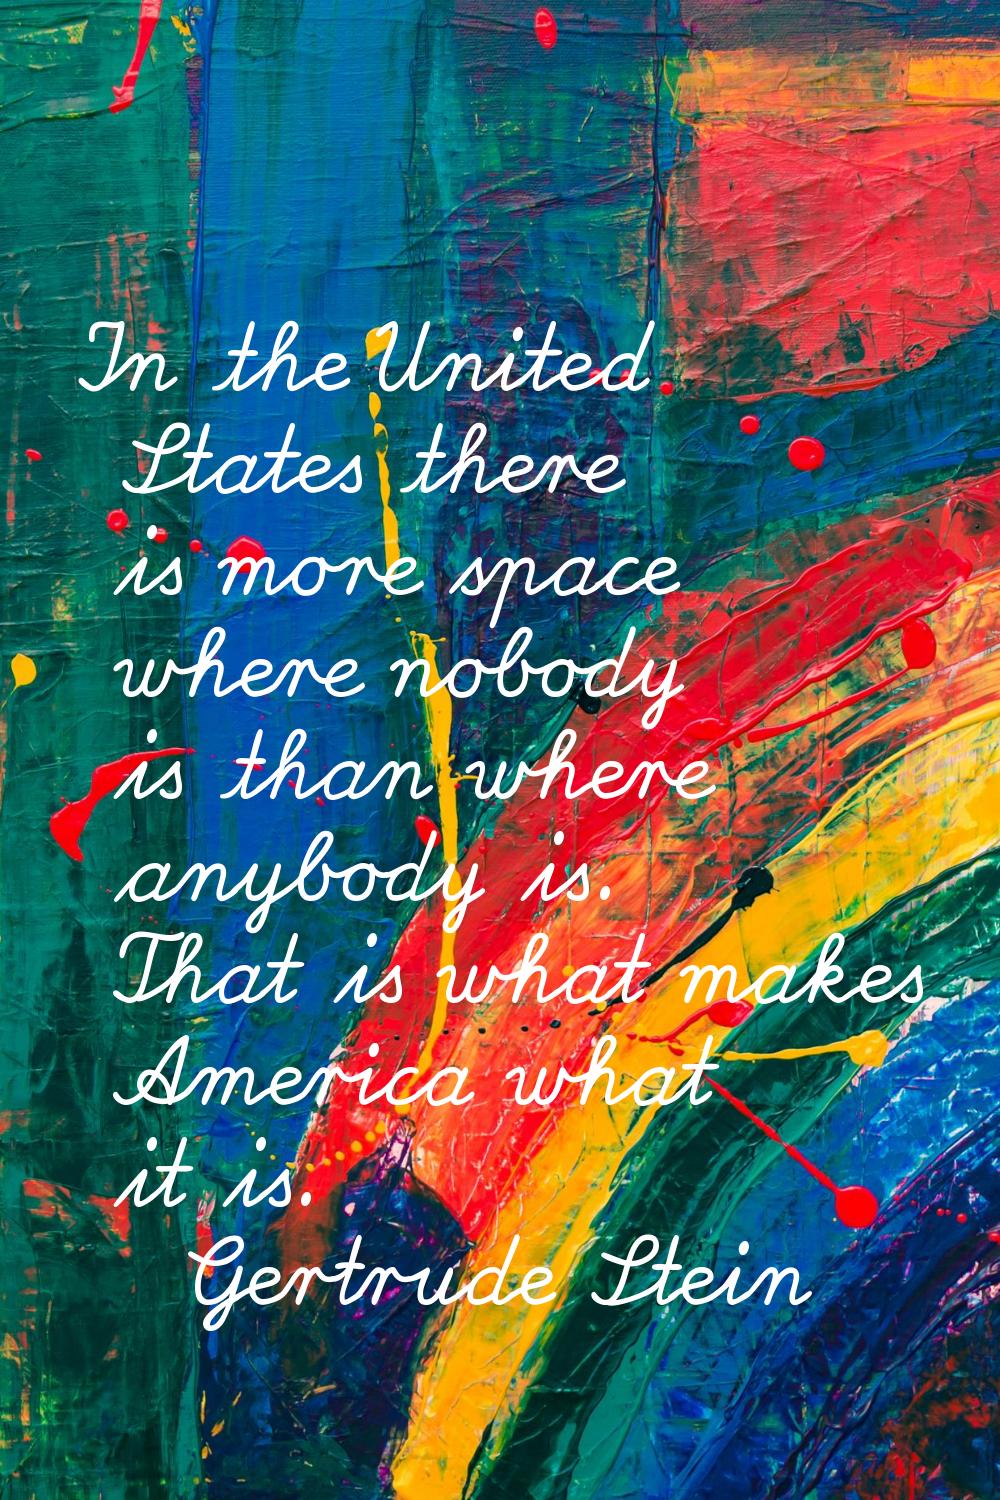 In the United States there is more space where nobody is than where anybody is. That is what makes 